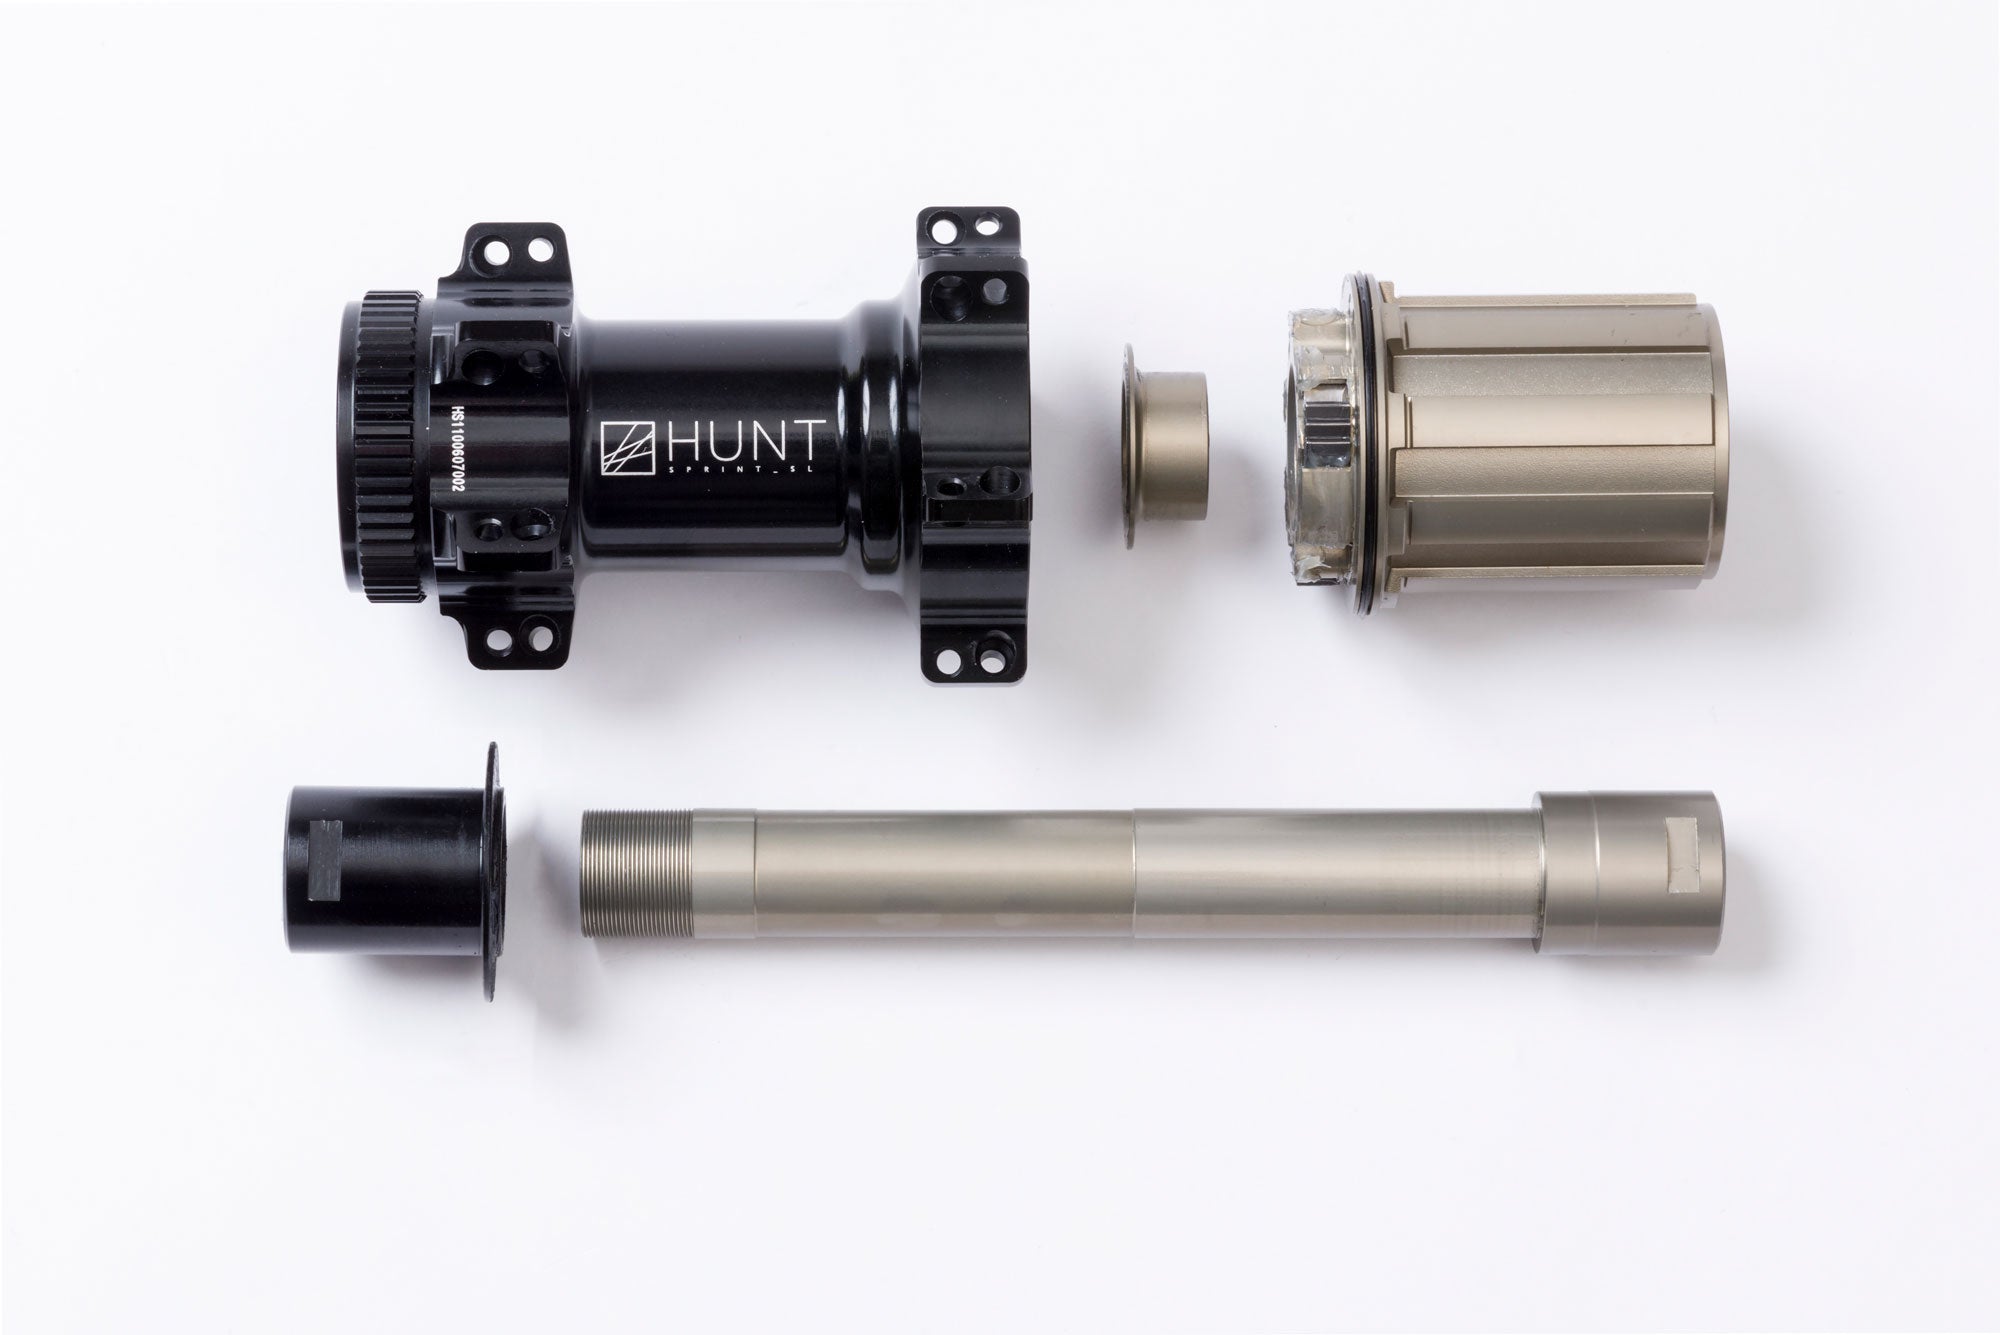 <h1>Freehub Body</h1><i>Featuring a 3 multi-point pawls with 3 teeth each and a 48 tooth ratchet ring results in an impressively low 7.5 degree engagement angle and excellent resistance to wear under heavy loads. The Sprint SL freehub has strong individual pawl springs which engage quicker. There is also a Steel Spline Insert re-enforcement to provide excellent durability against cassette sprocket damage often seen on standard alloy freehub bodies.</i>